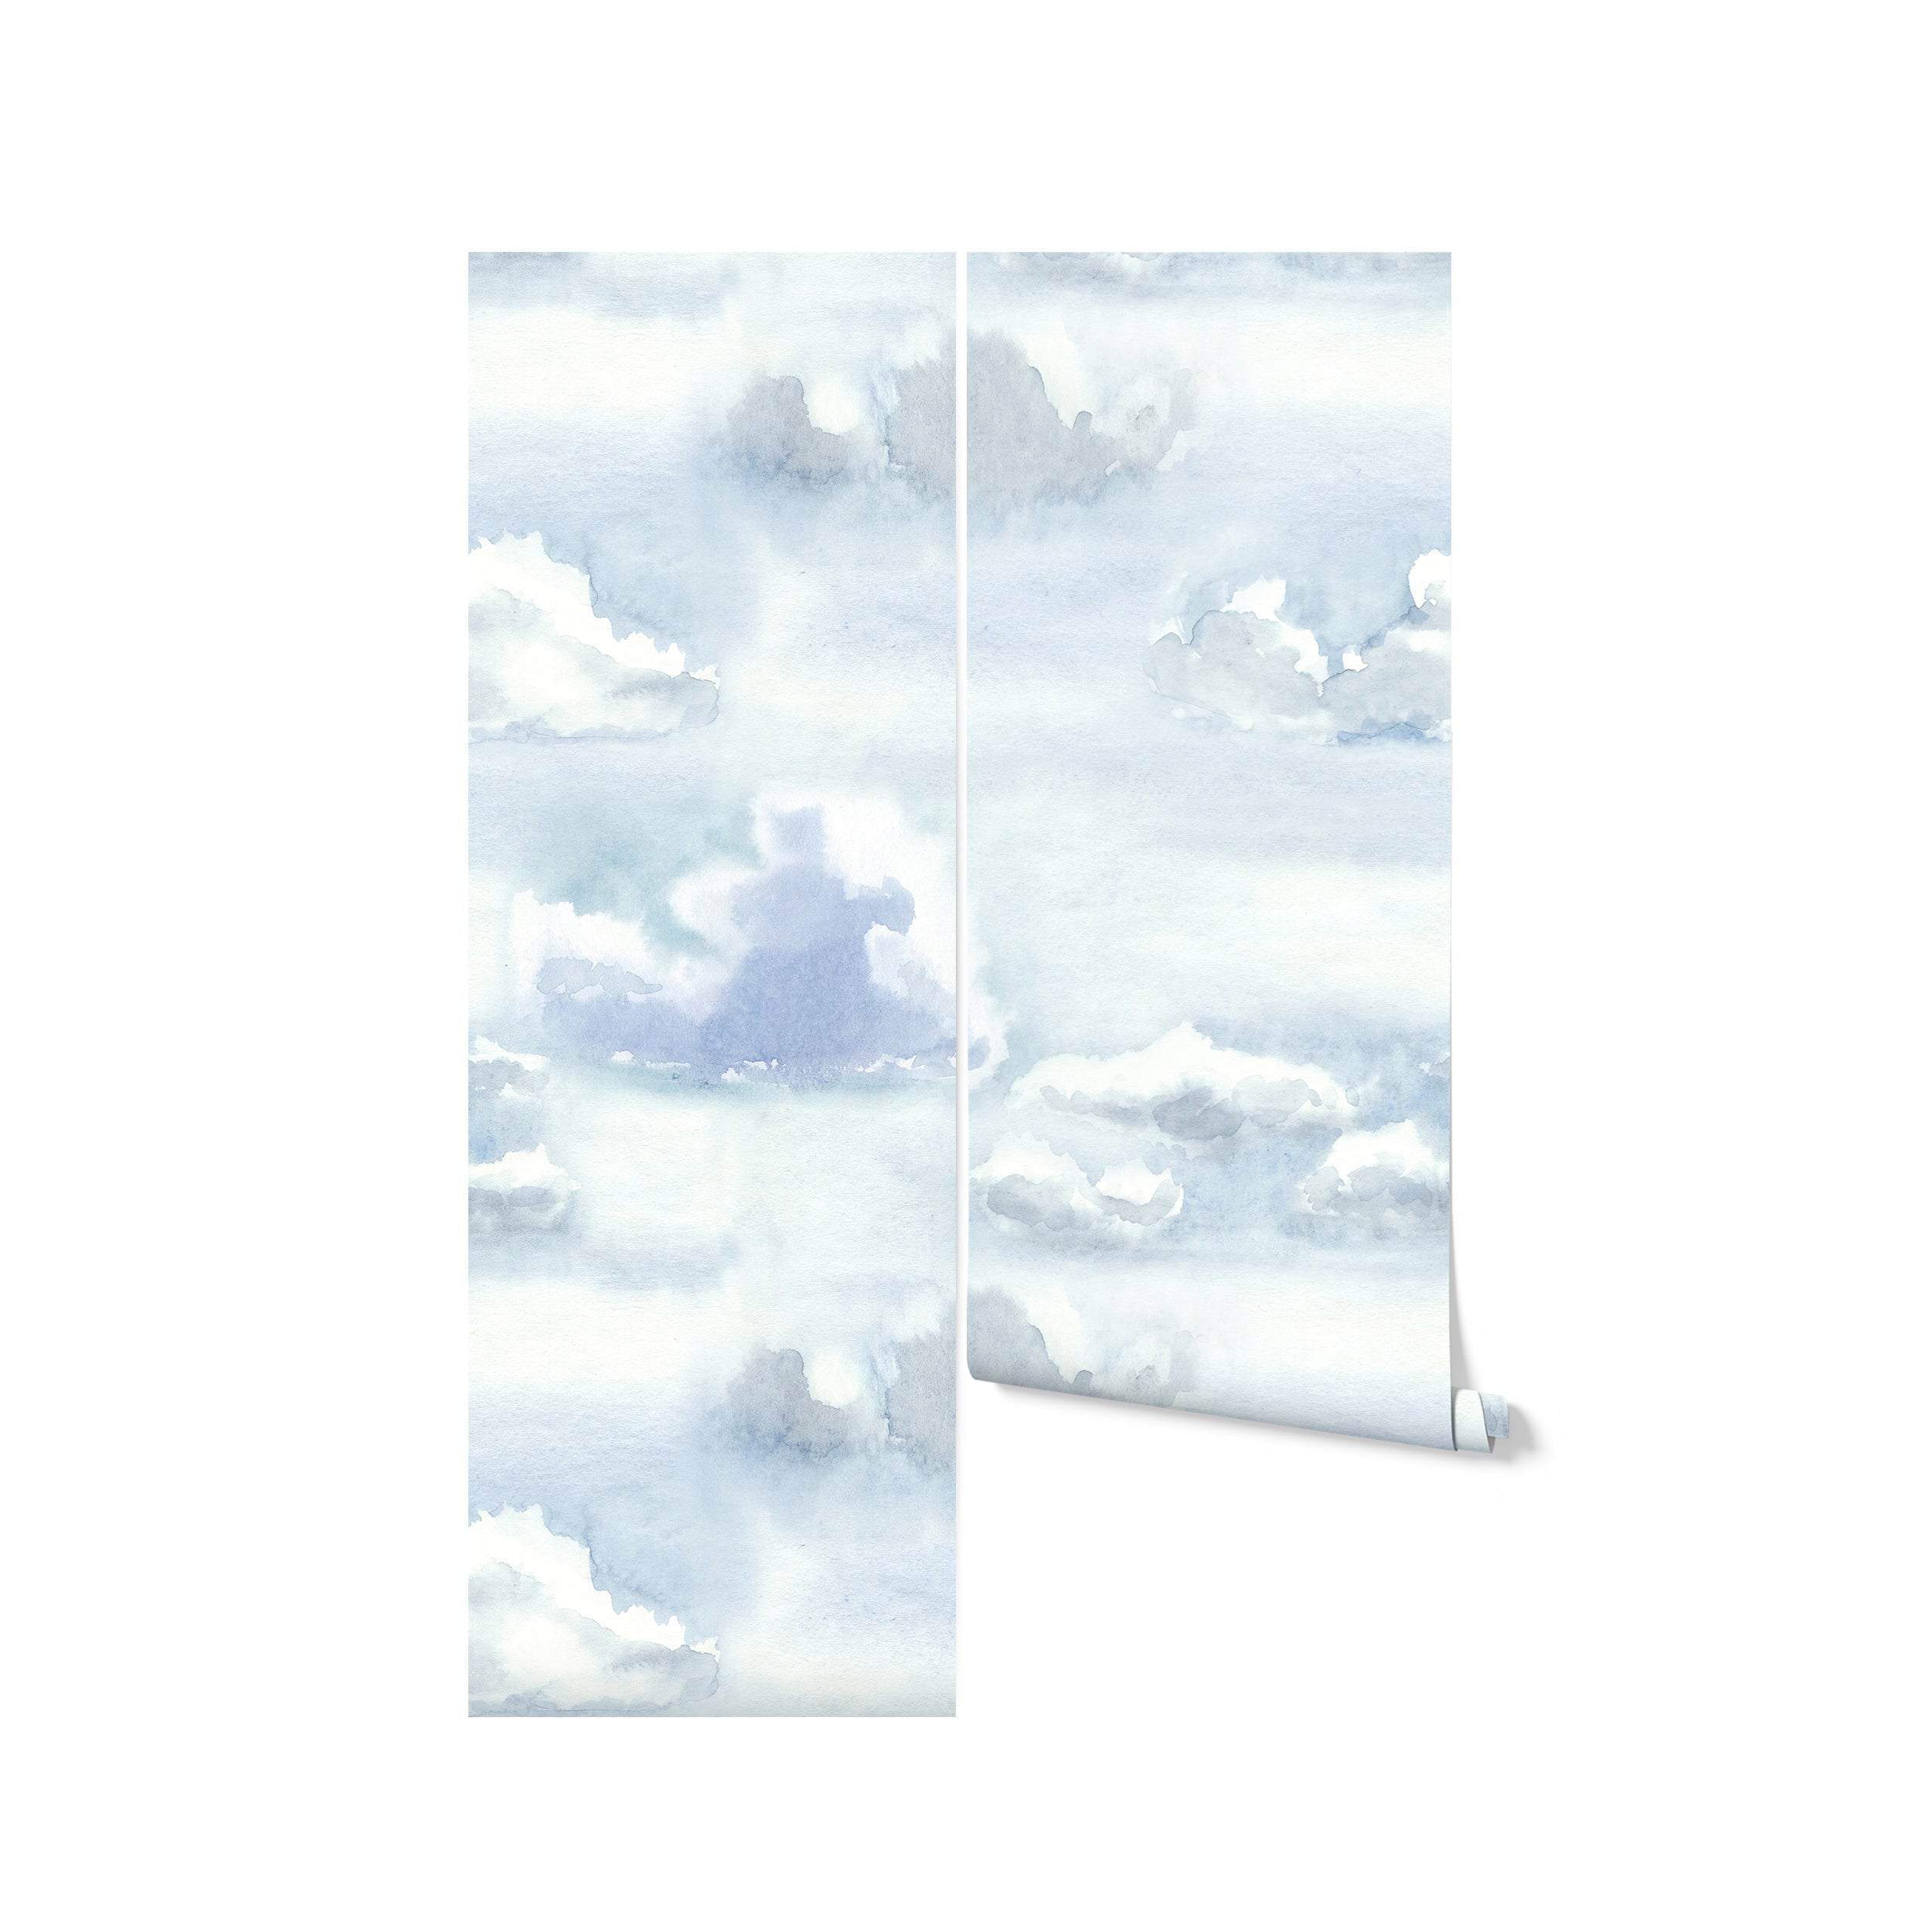 A single roll of the Watercolour Cloud and Skies II wallpaper unfurled slightly to reveal its artistic, serene cloud pattern with watercolor blue hues.